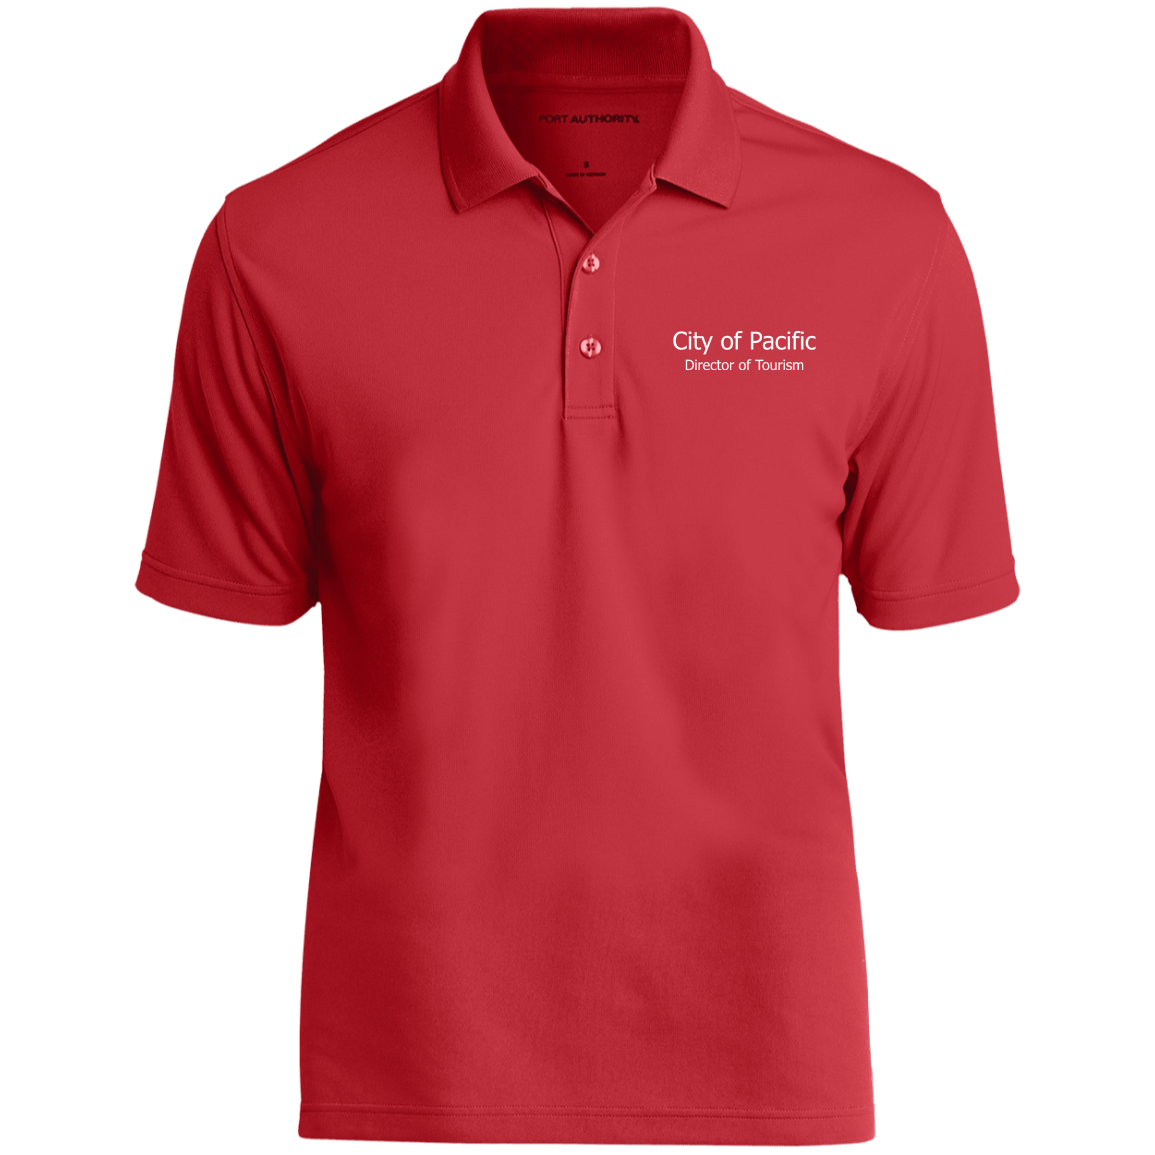 K110 Embroidered Dry Zone UV Micro-Mesh Polo